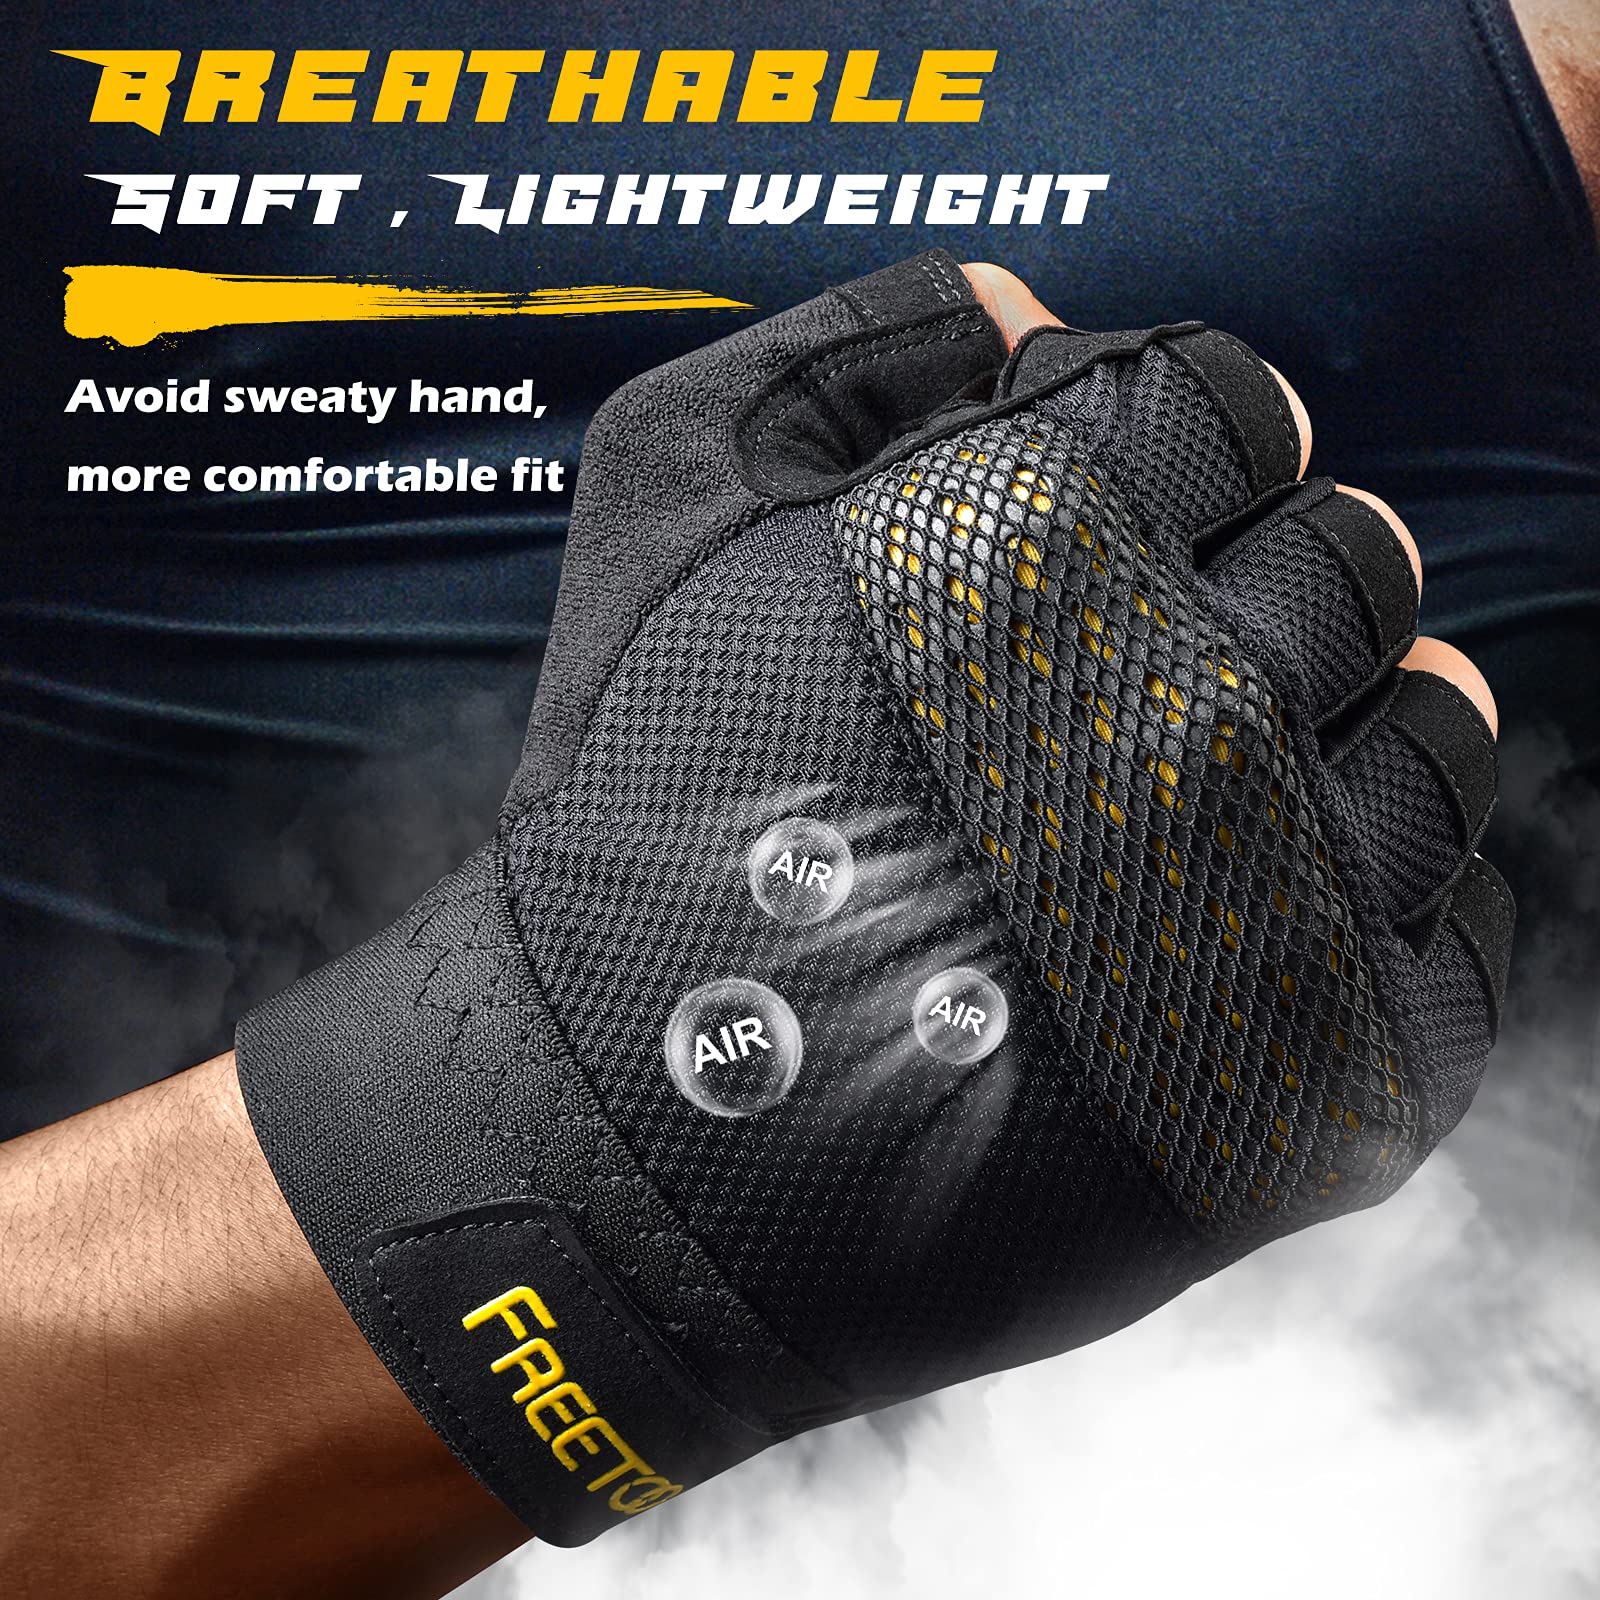 FREETOO Workout Gloves for Men 2021 Latest, [Full Palm Protection] [Ultra Ventilated] Weight Lifting Gloves with Cushion Pads and Silicone Grip Gym Gloves Durable Training Gloves for Exercise Fitness